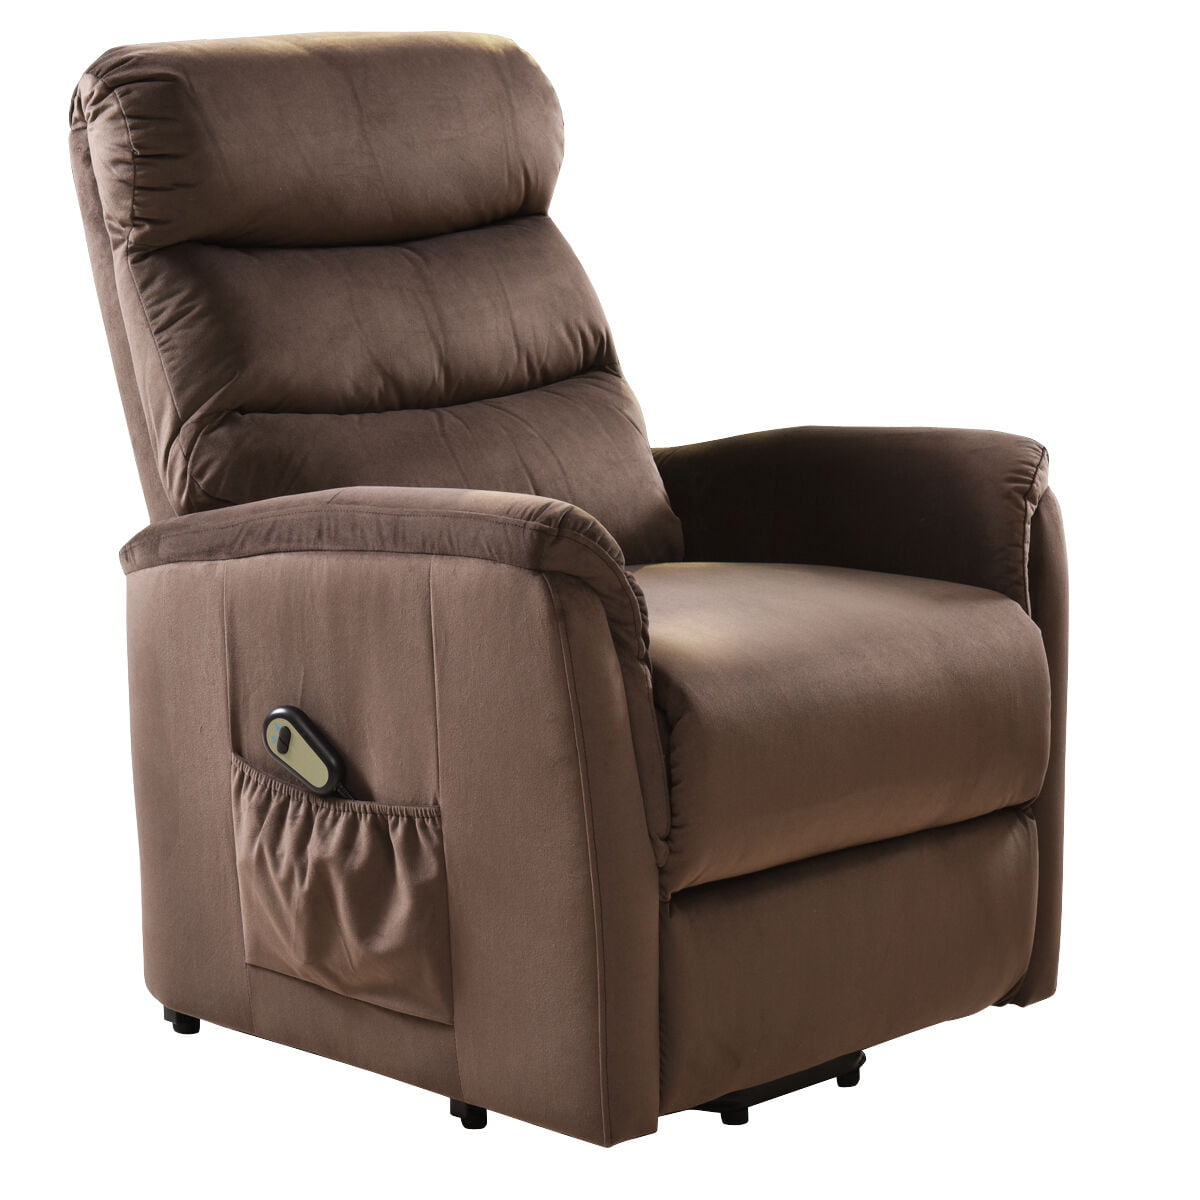 Electric Power Lift Chair Recliner Sofa Chair Remote Control Living Room Walmart Canada